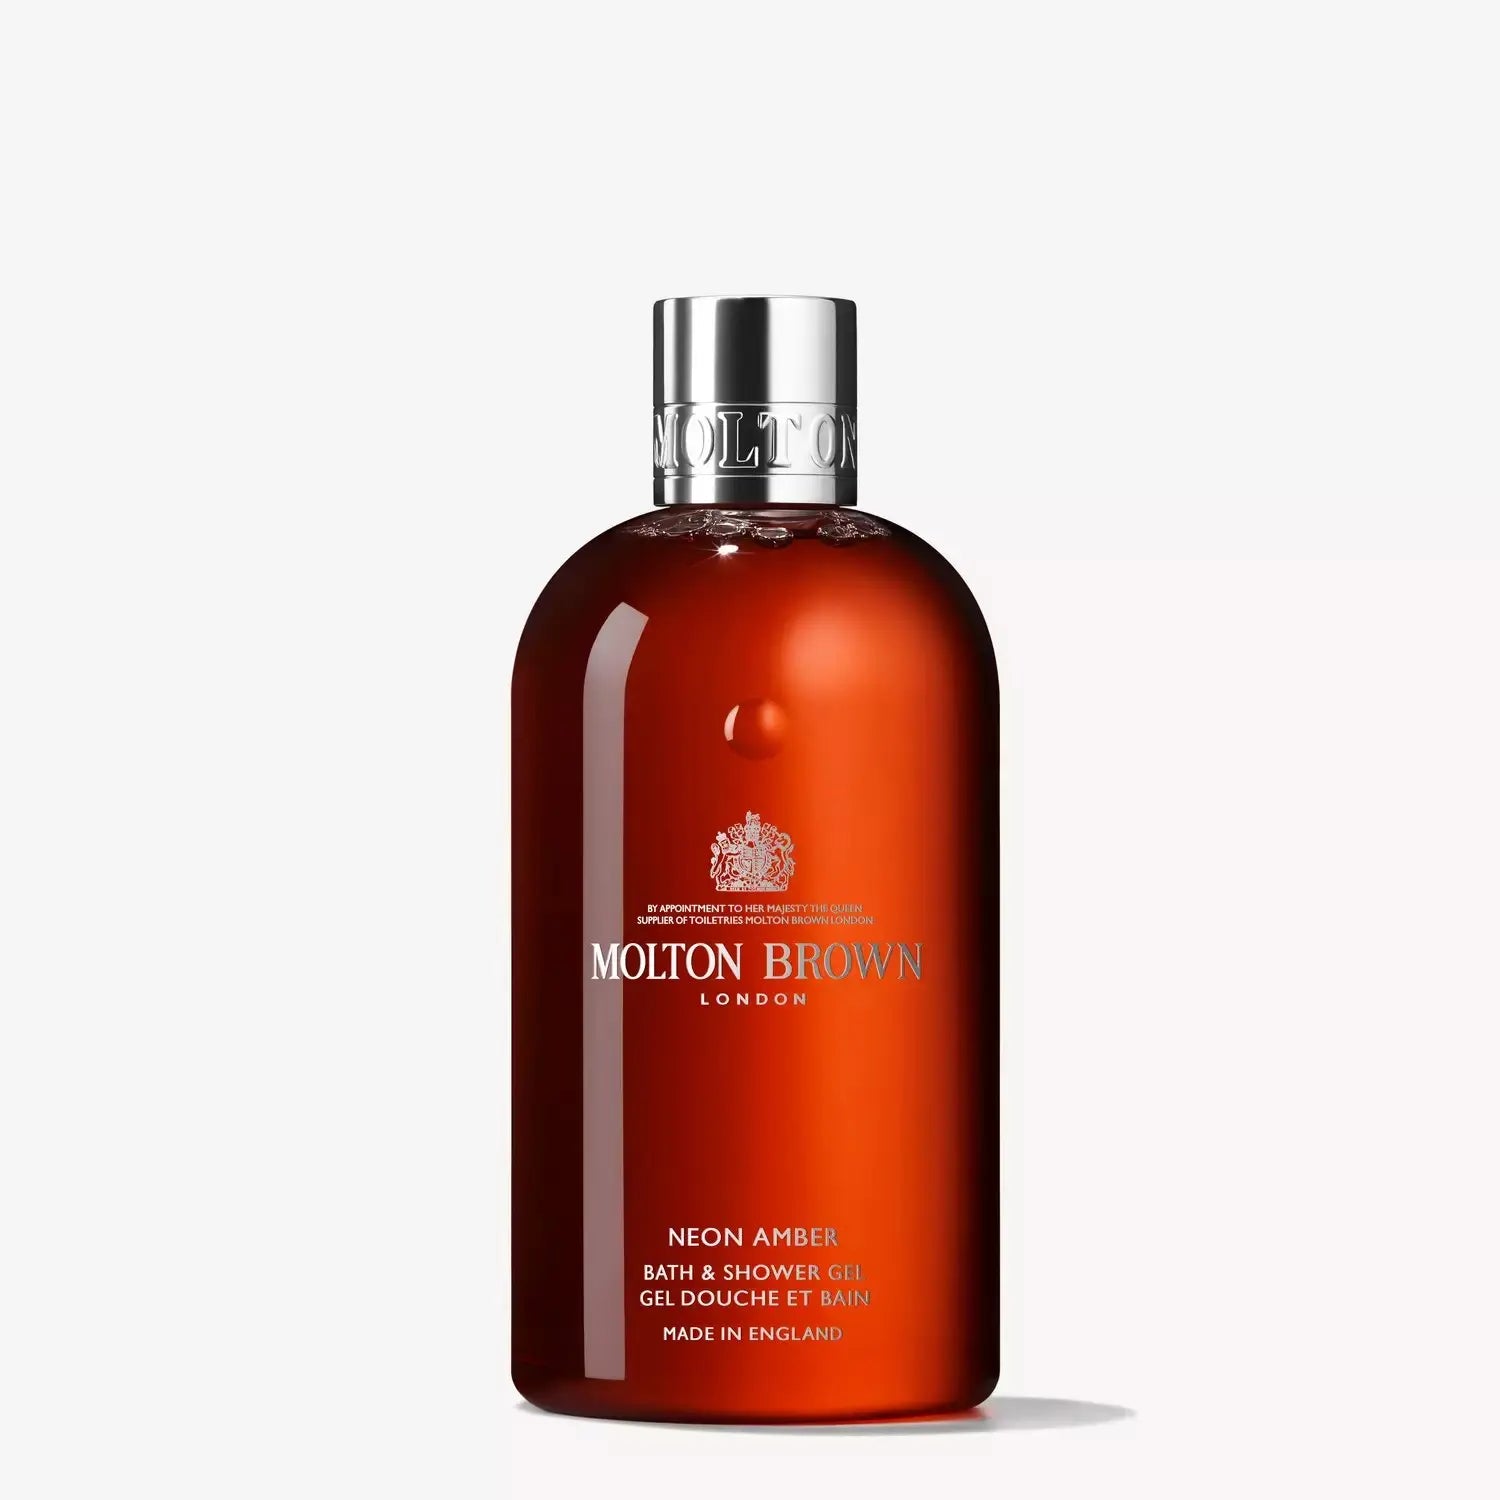 Molton Brown Neon Amber Bath and Shower Gel